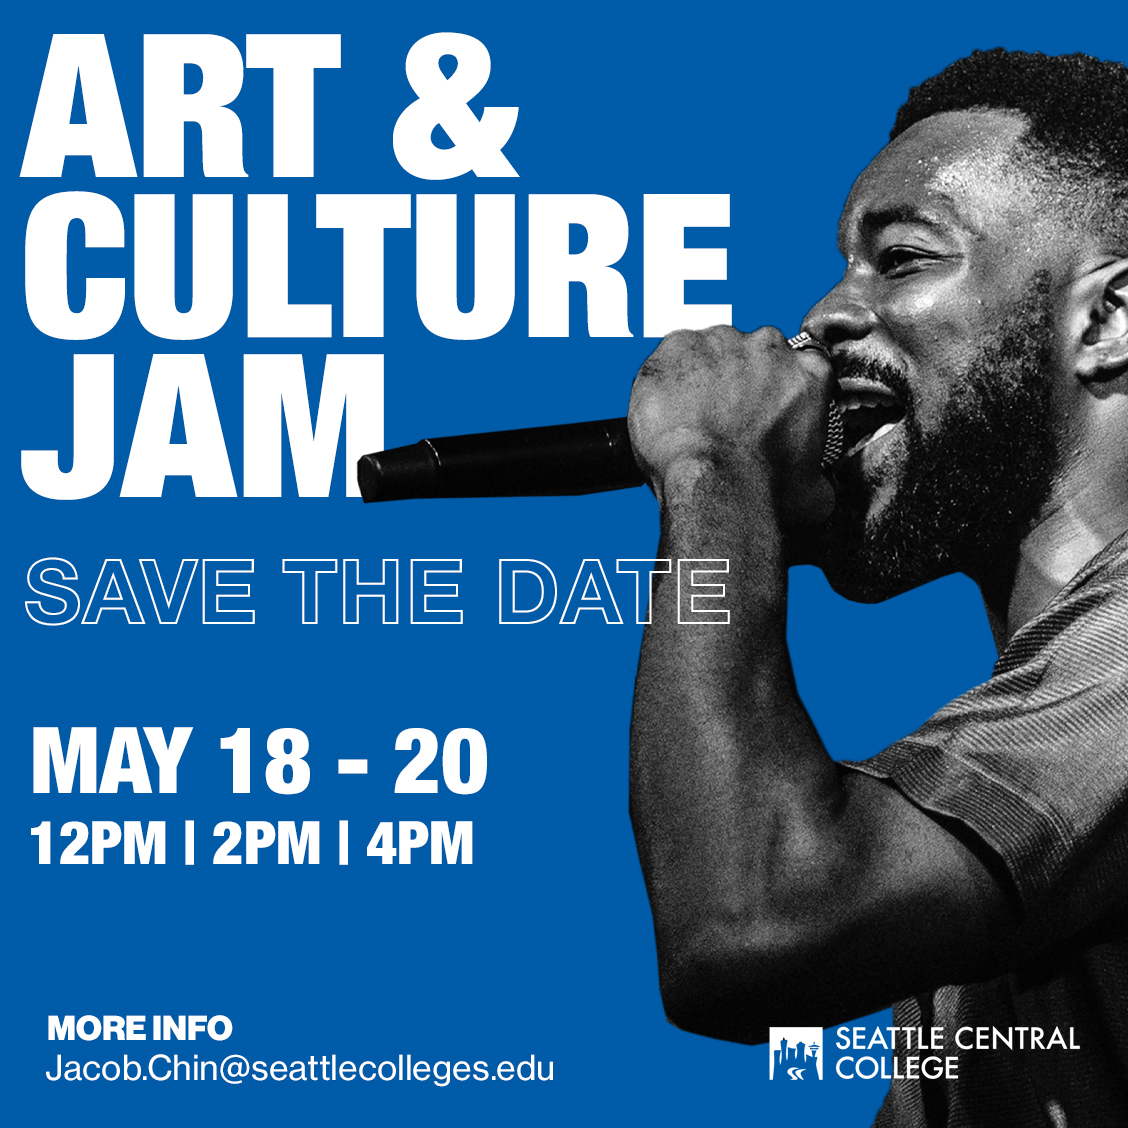 Save the date for the art and culture jam on May 18th through 20th, at 12pm, 2pm, and 4pm. More information at Jacob.Chin@seattlecolleges.edu